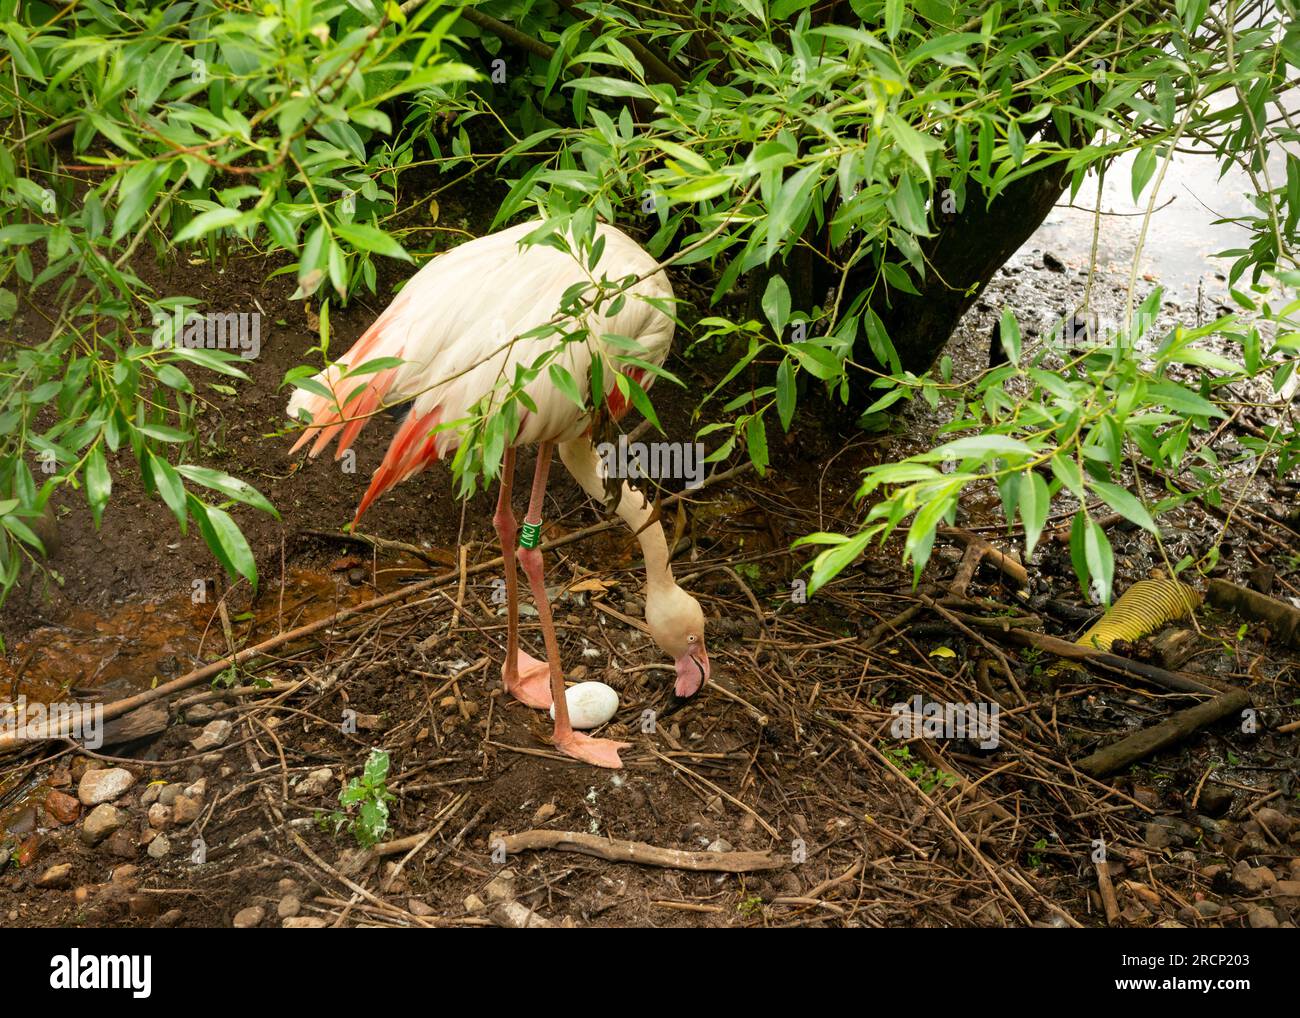 Greater Flamingo or Phoenicopterus roseus preparing to incubate egg on the ground in Gdansk Zoo, Gdansk, Poland, Europe, EU Stock Photo